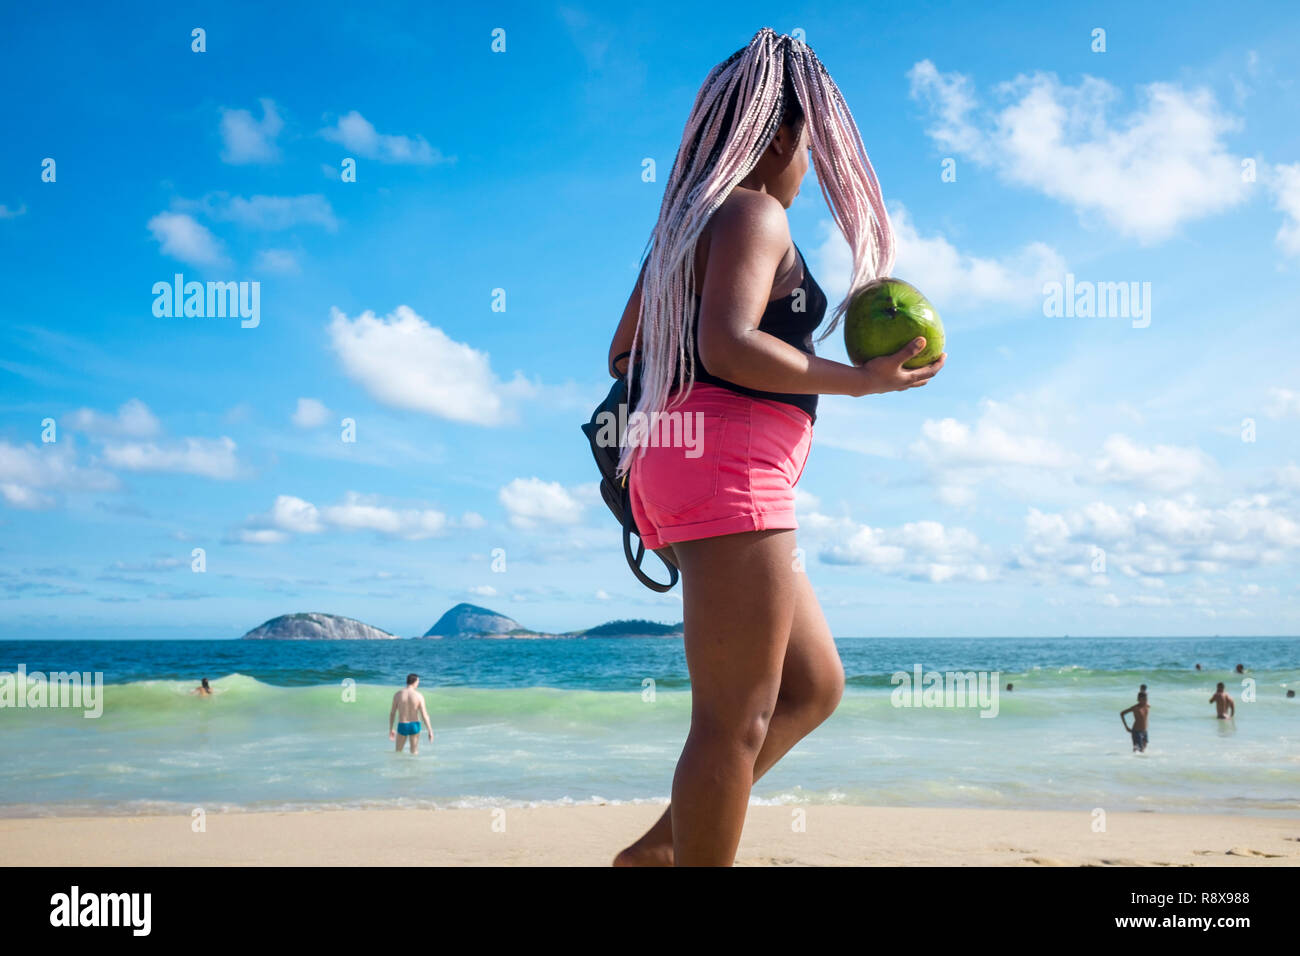 RIO DE JANEIRO - JANUARY, 2018: A young woman with pink braided hair walks with a fresh green coconut on the shore of Ipanema Beach. Stock Photo